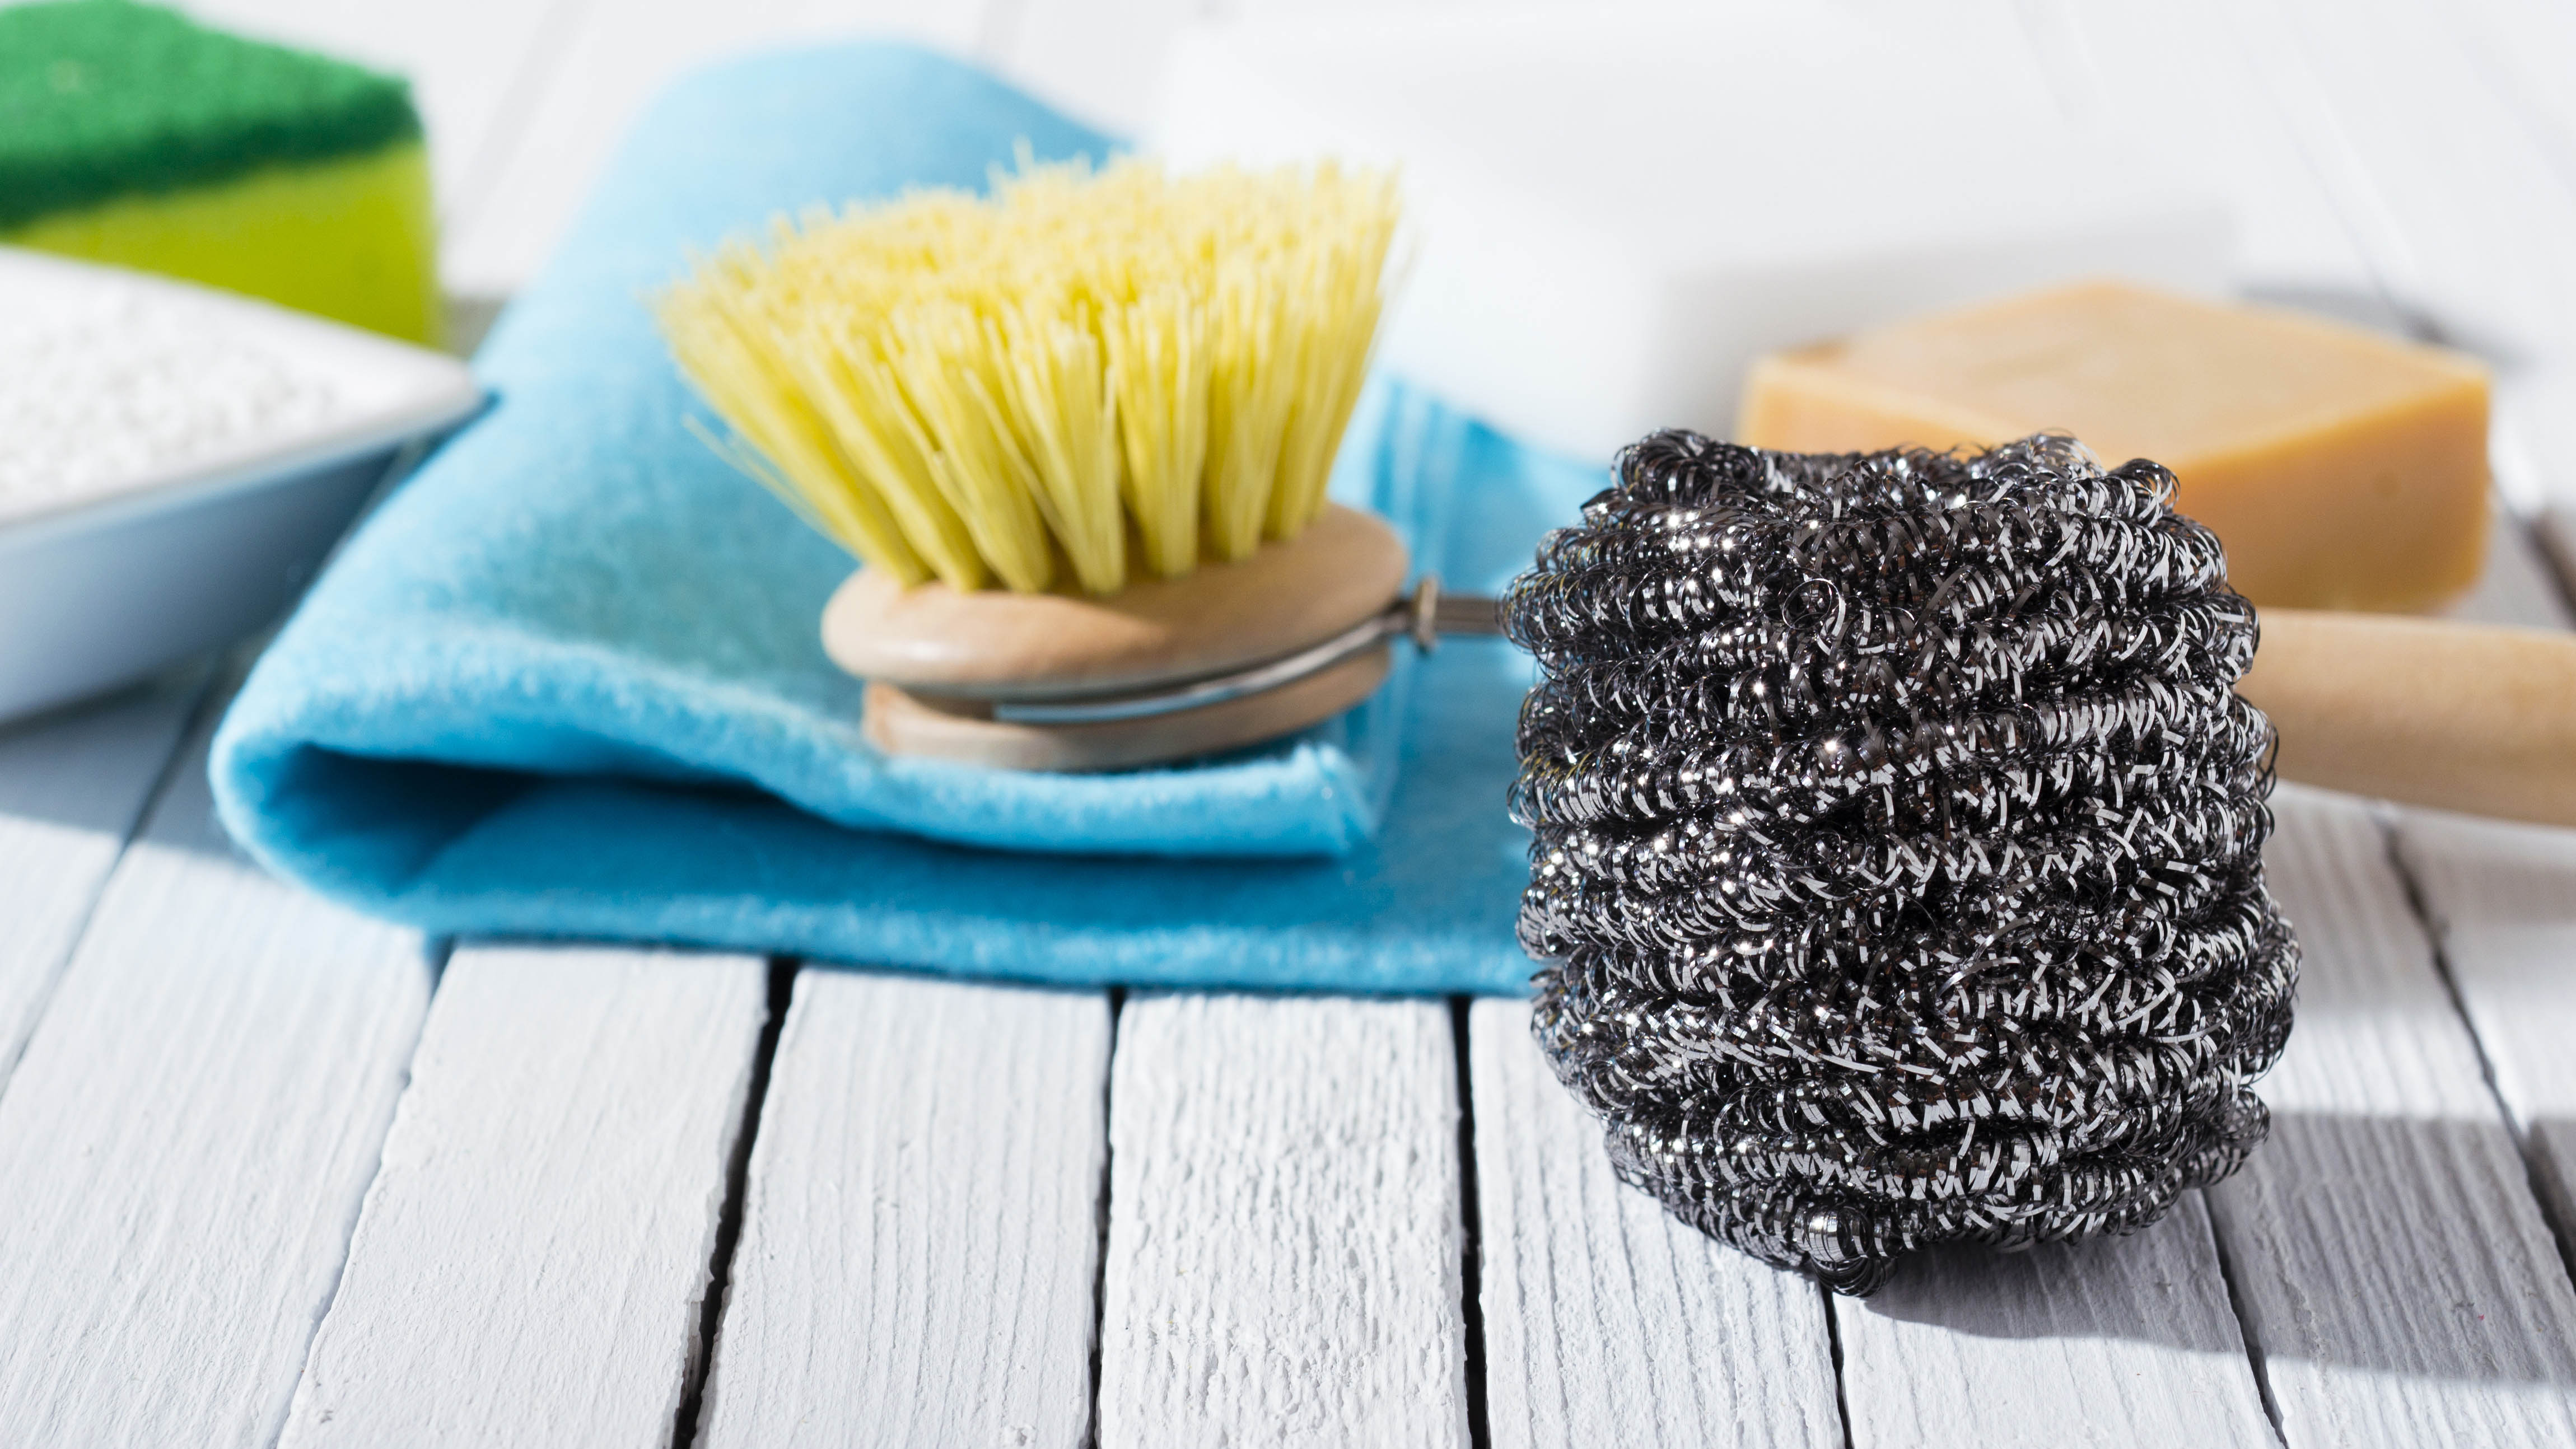 7 ways you didn't know you could use steel wool